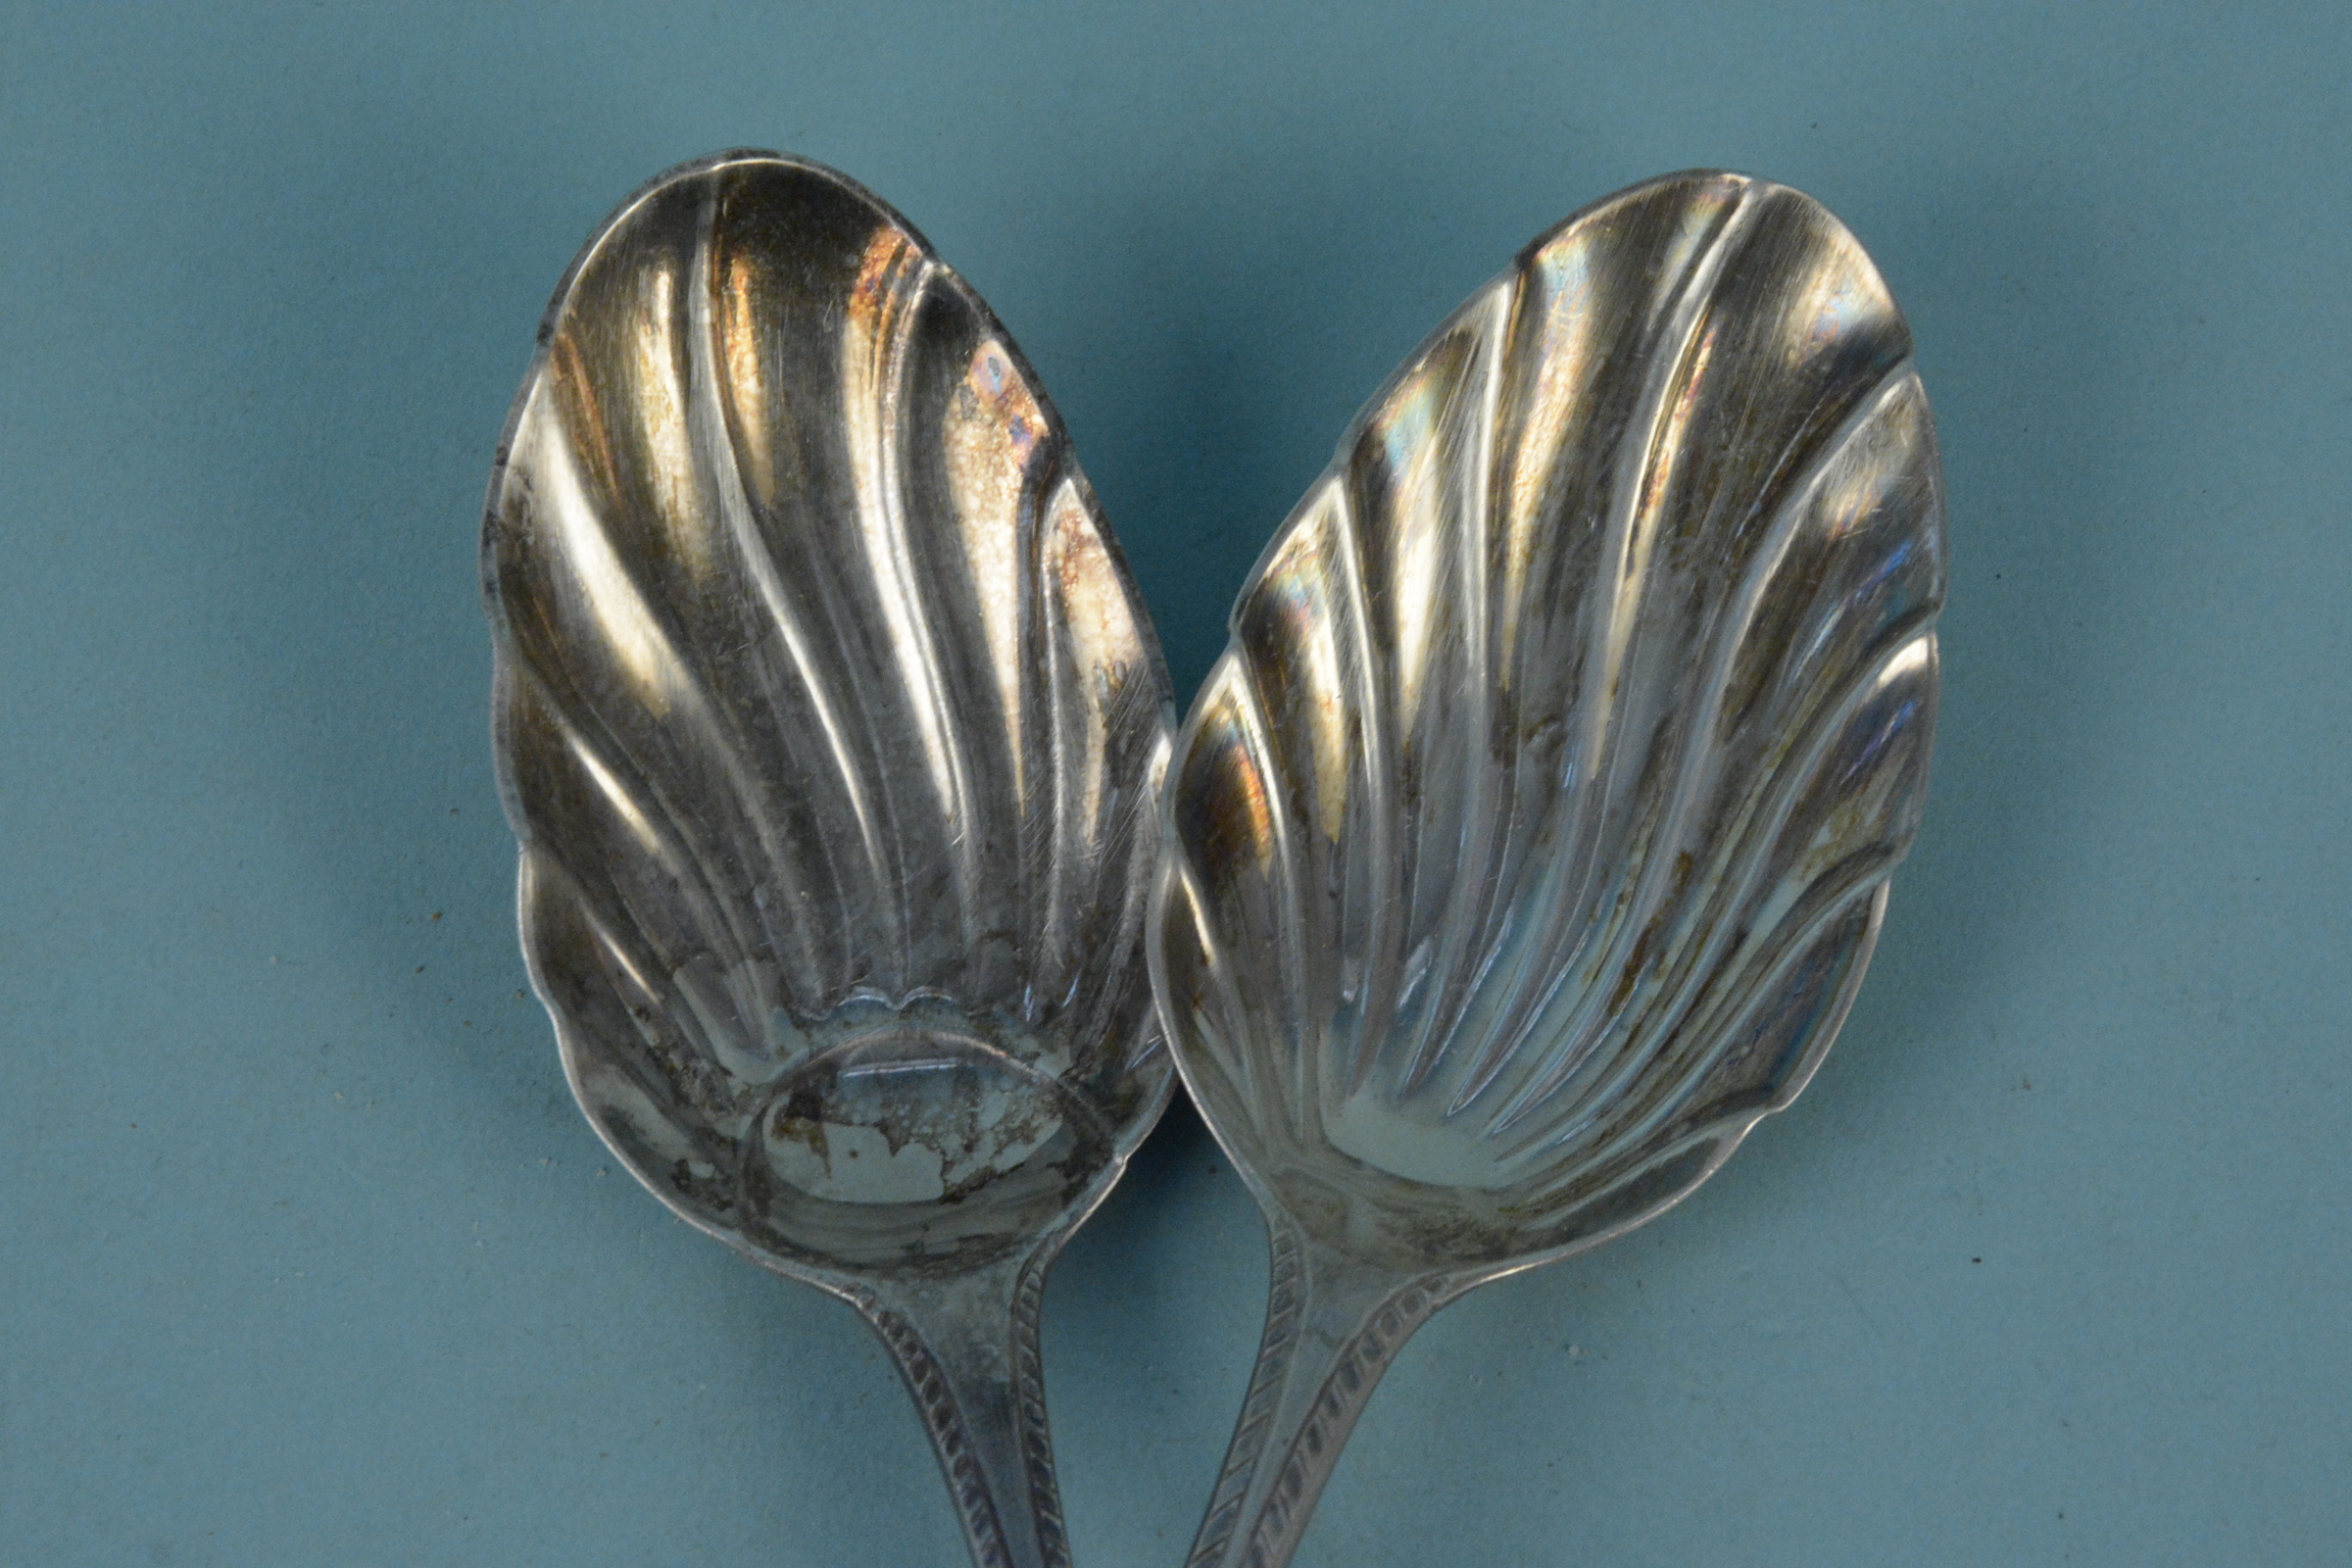 Two similar Georgian silver spoons with patterned bowls (one rubbed marks), - Image 2 of 3